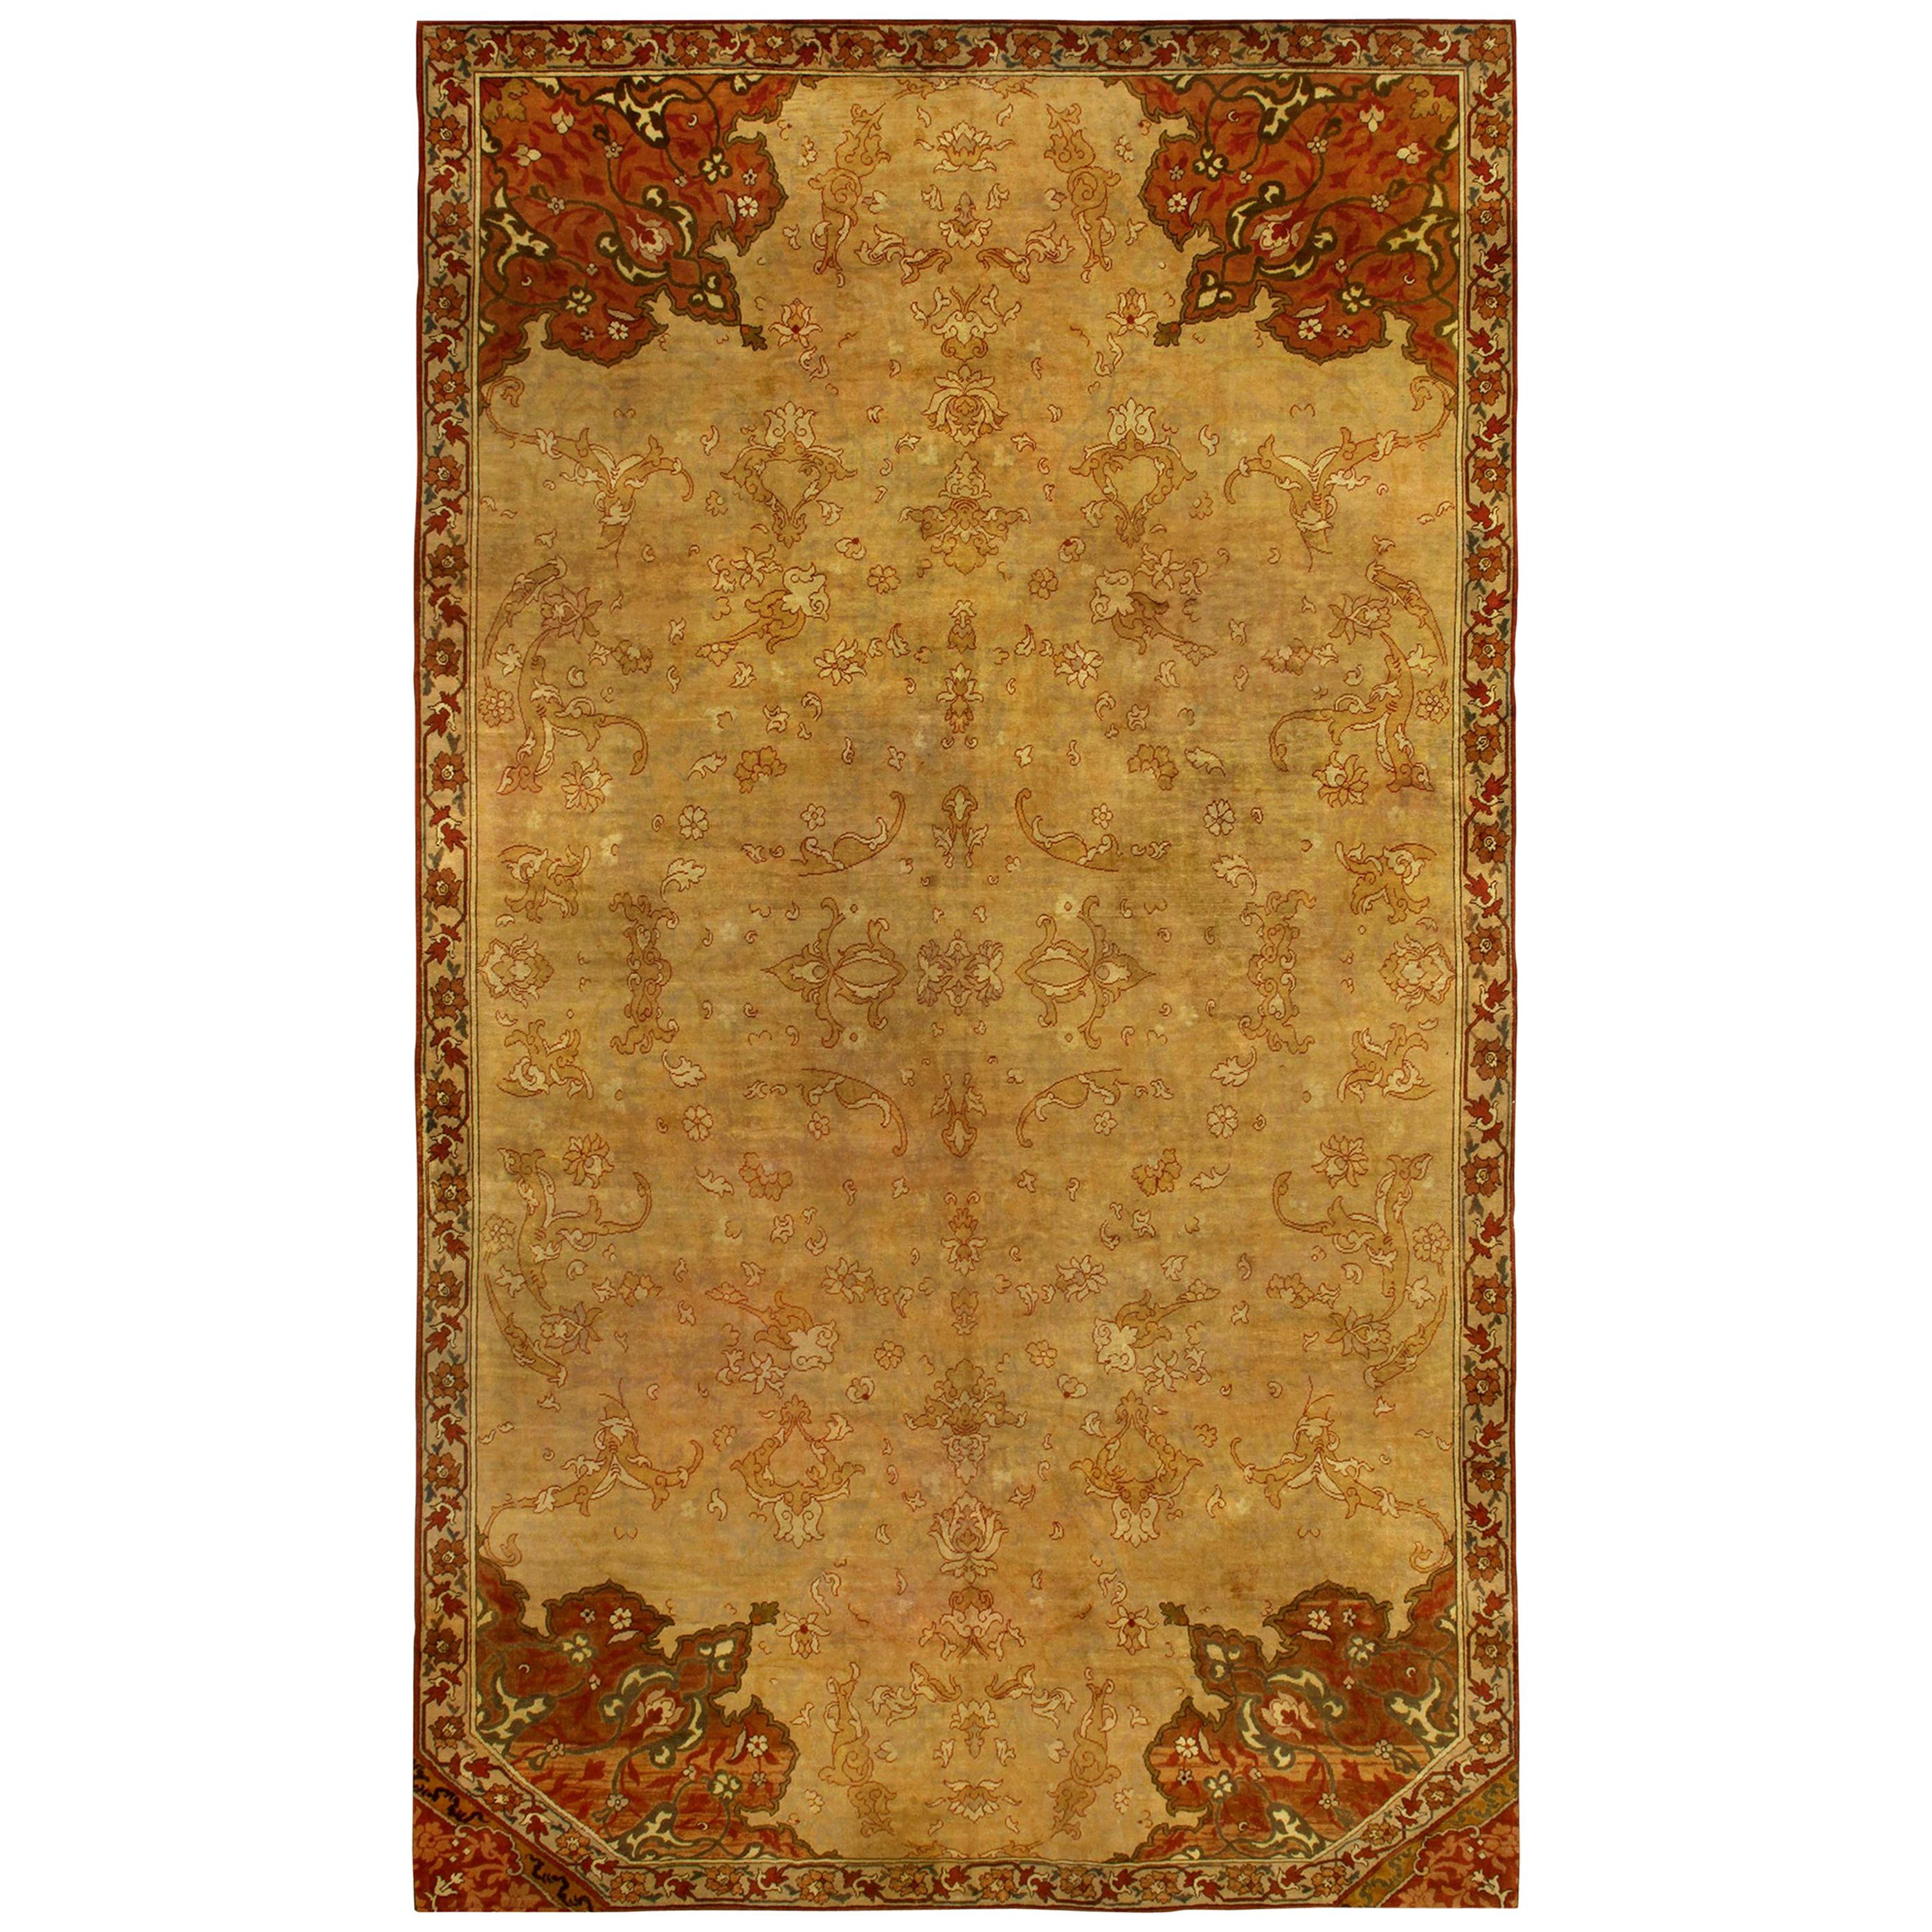 Authentic 1900 Turkish Oushak Handmade Wool Rug For Sale